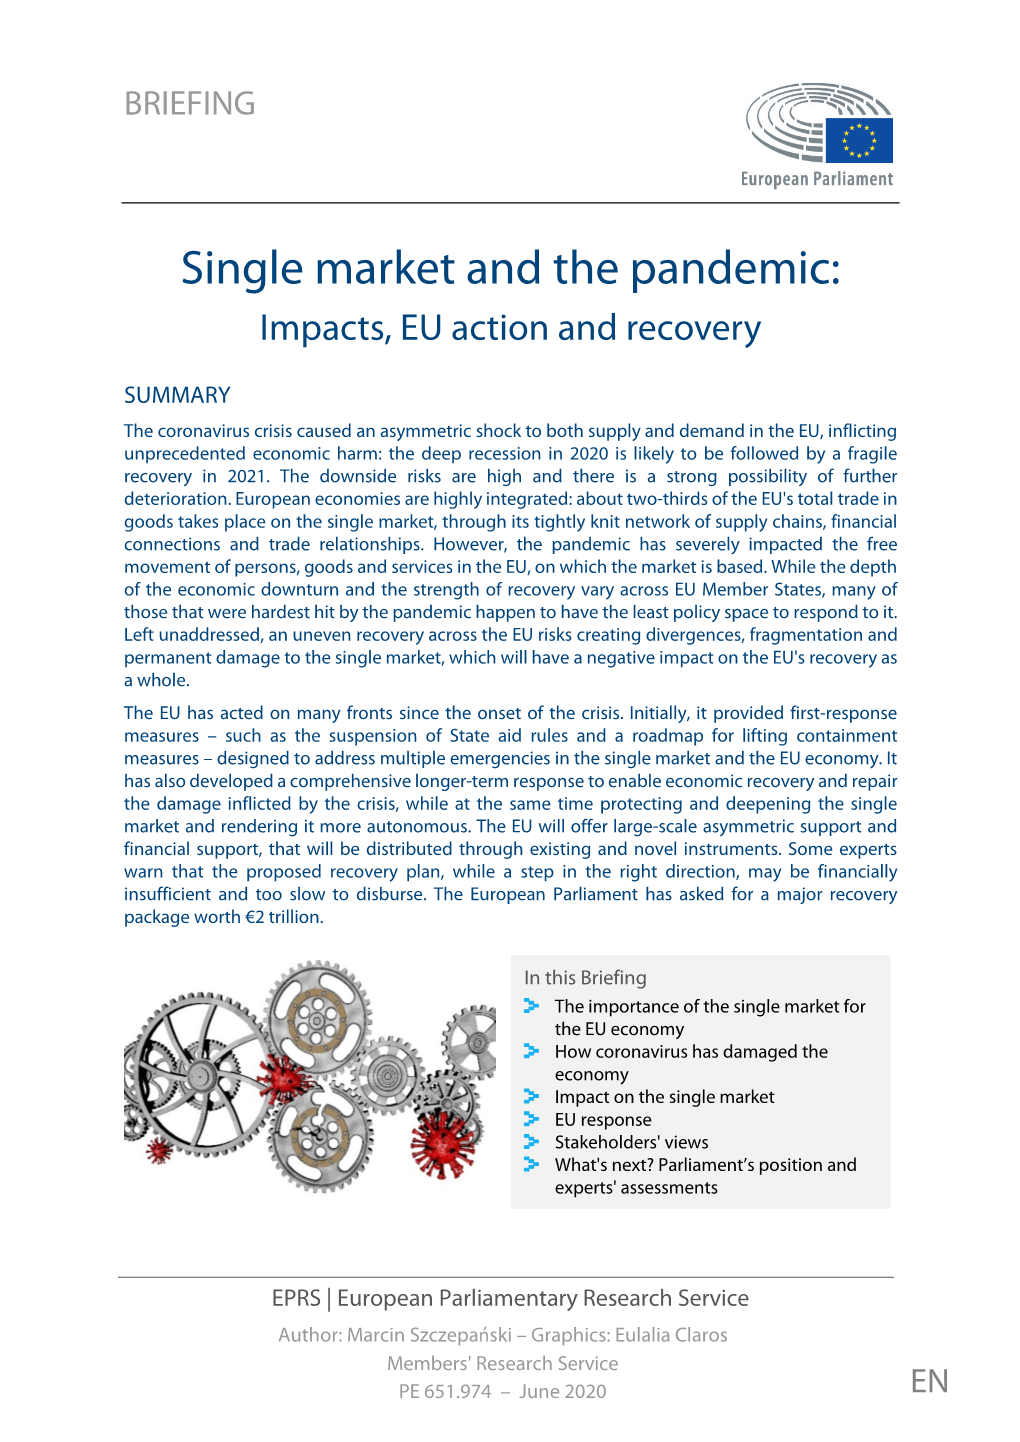 Single Market and the Pandemic: Impacts, EU Action and Recovery